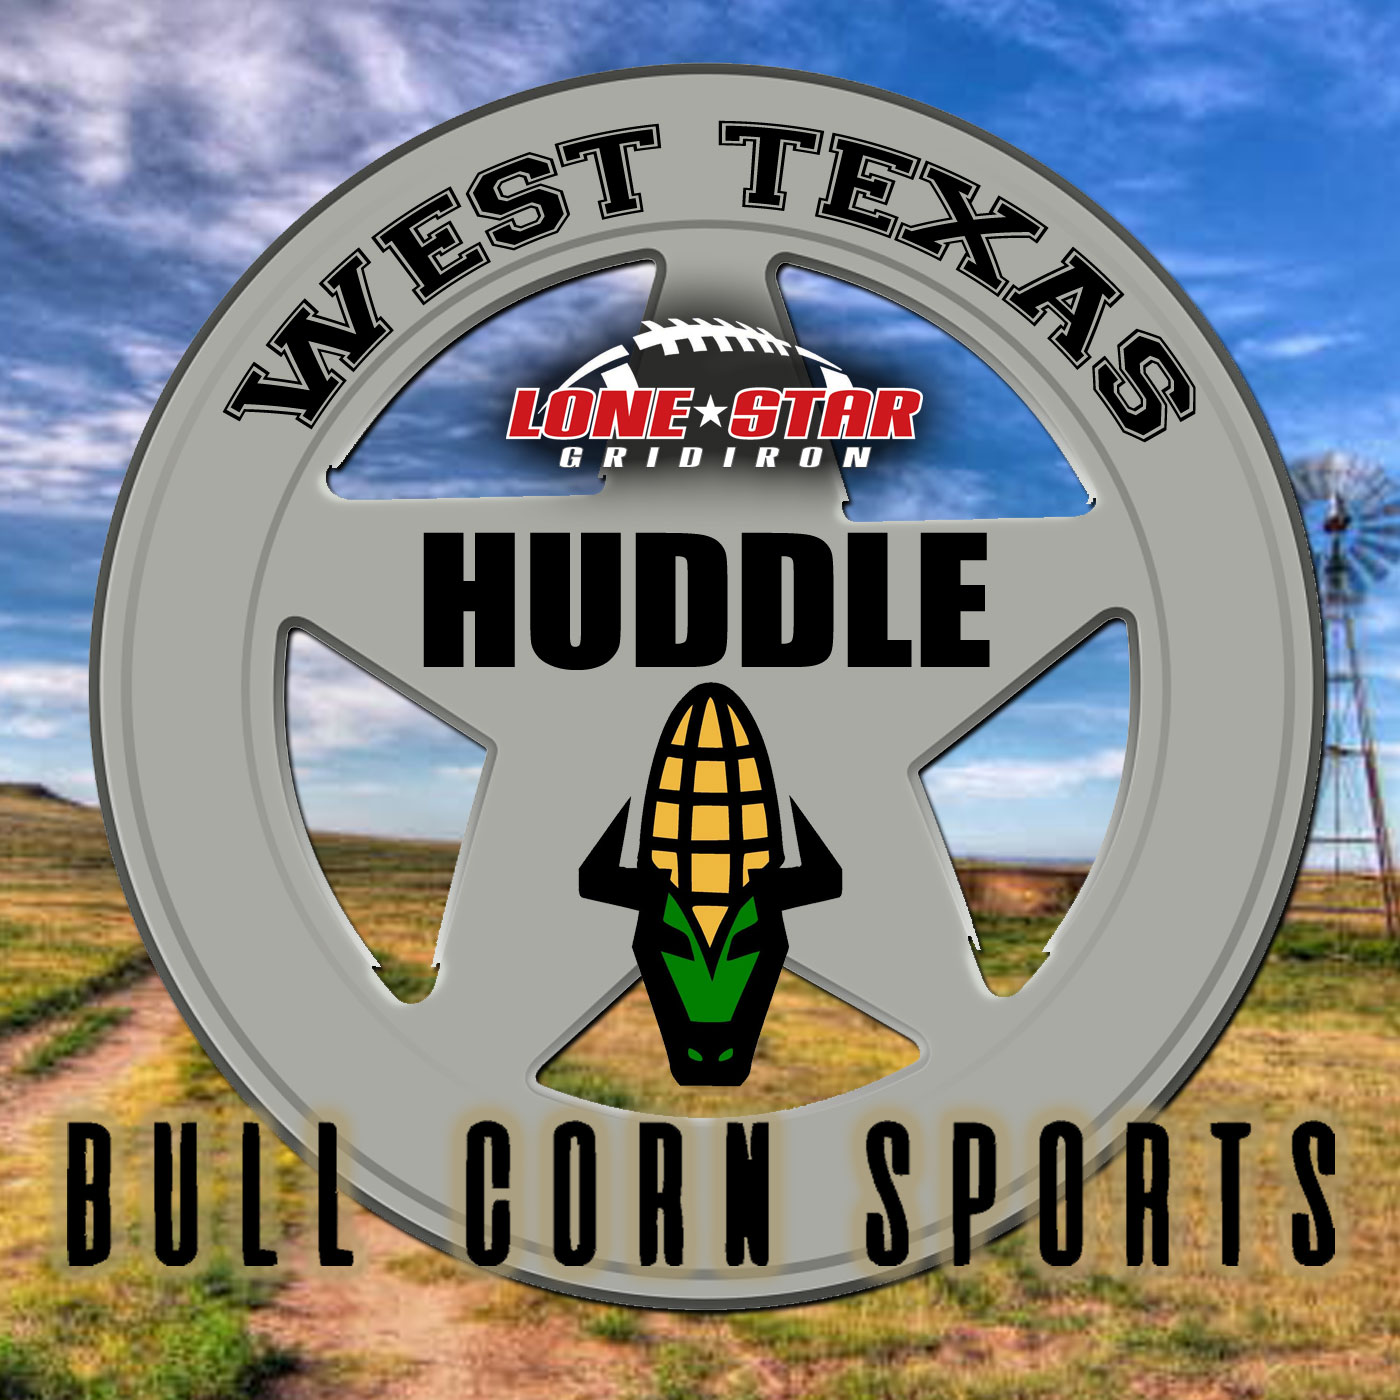 West Texas Huddle featuring Bull Corn Sports